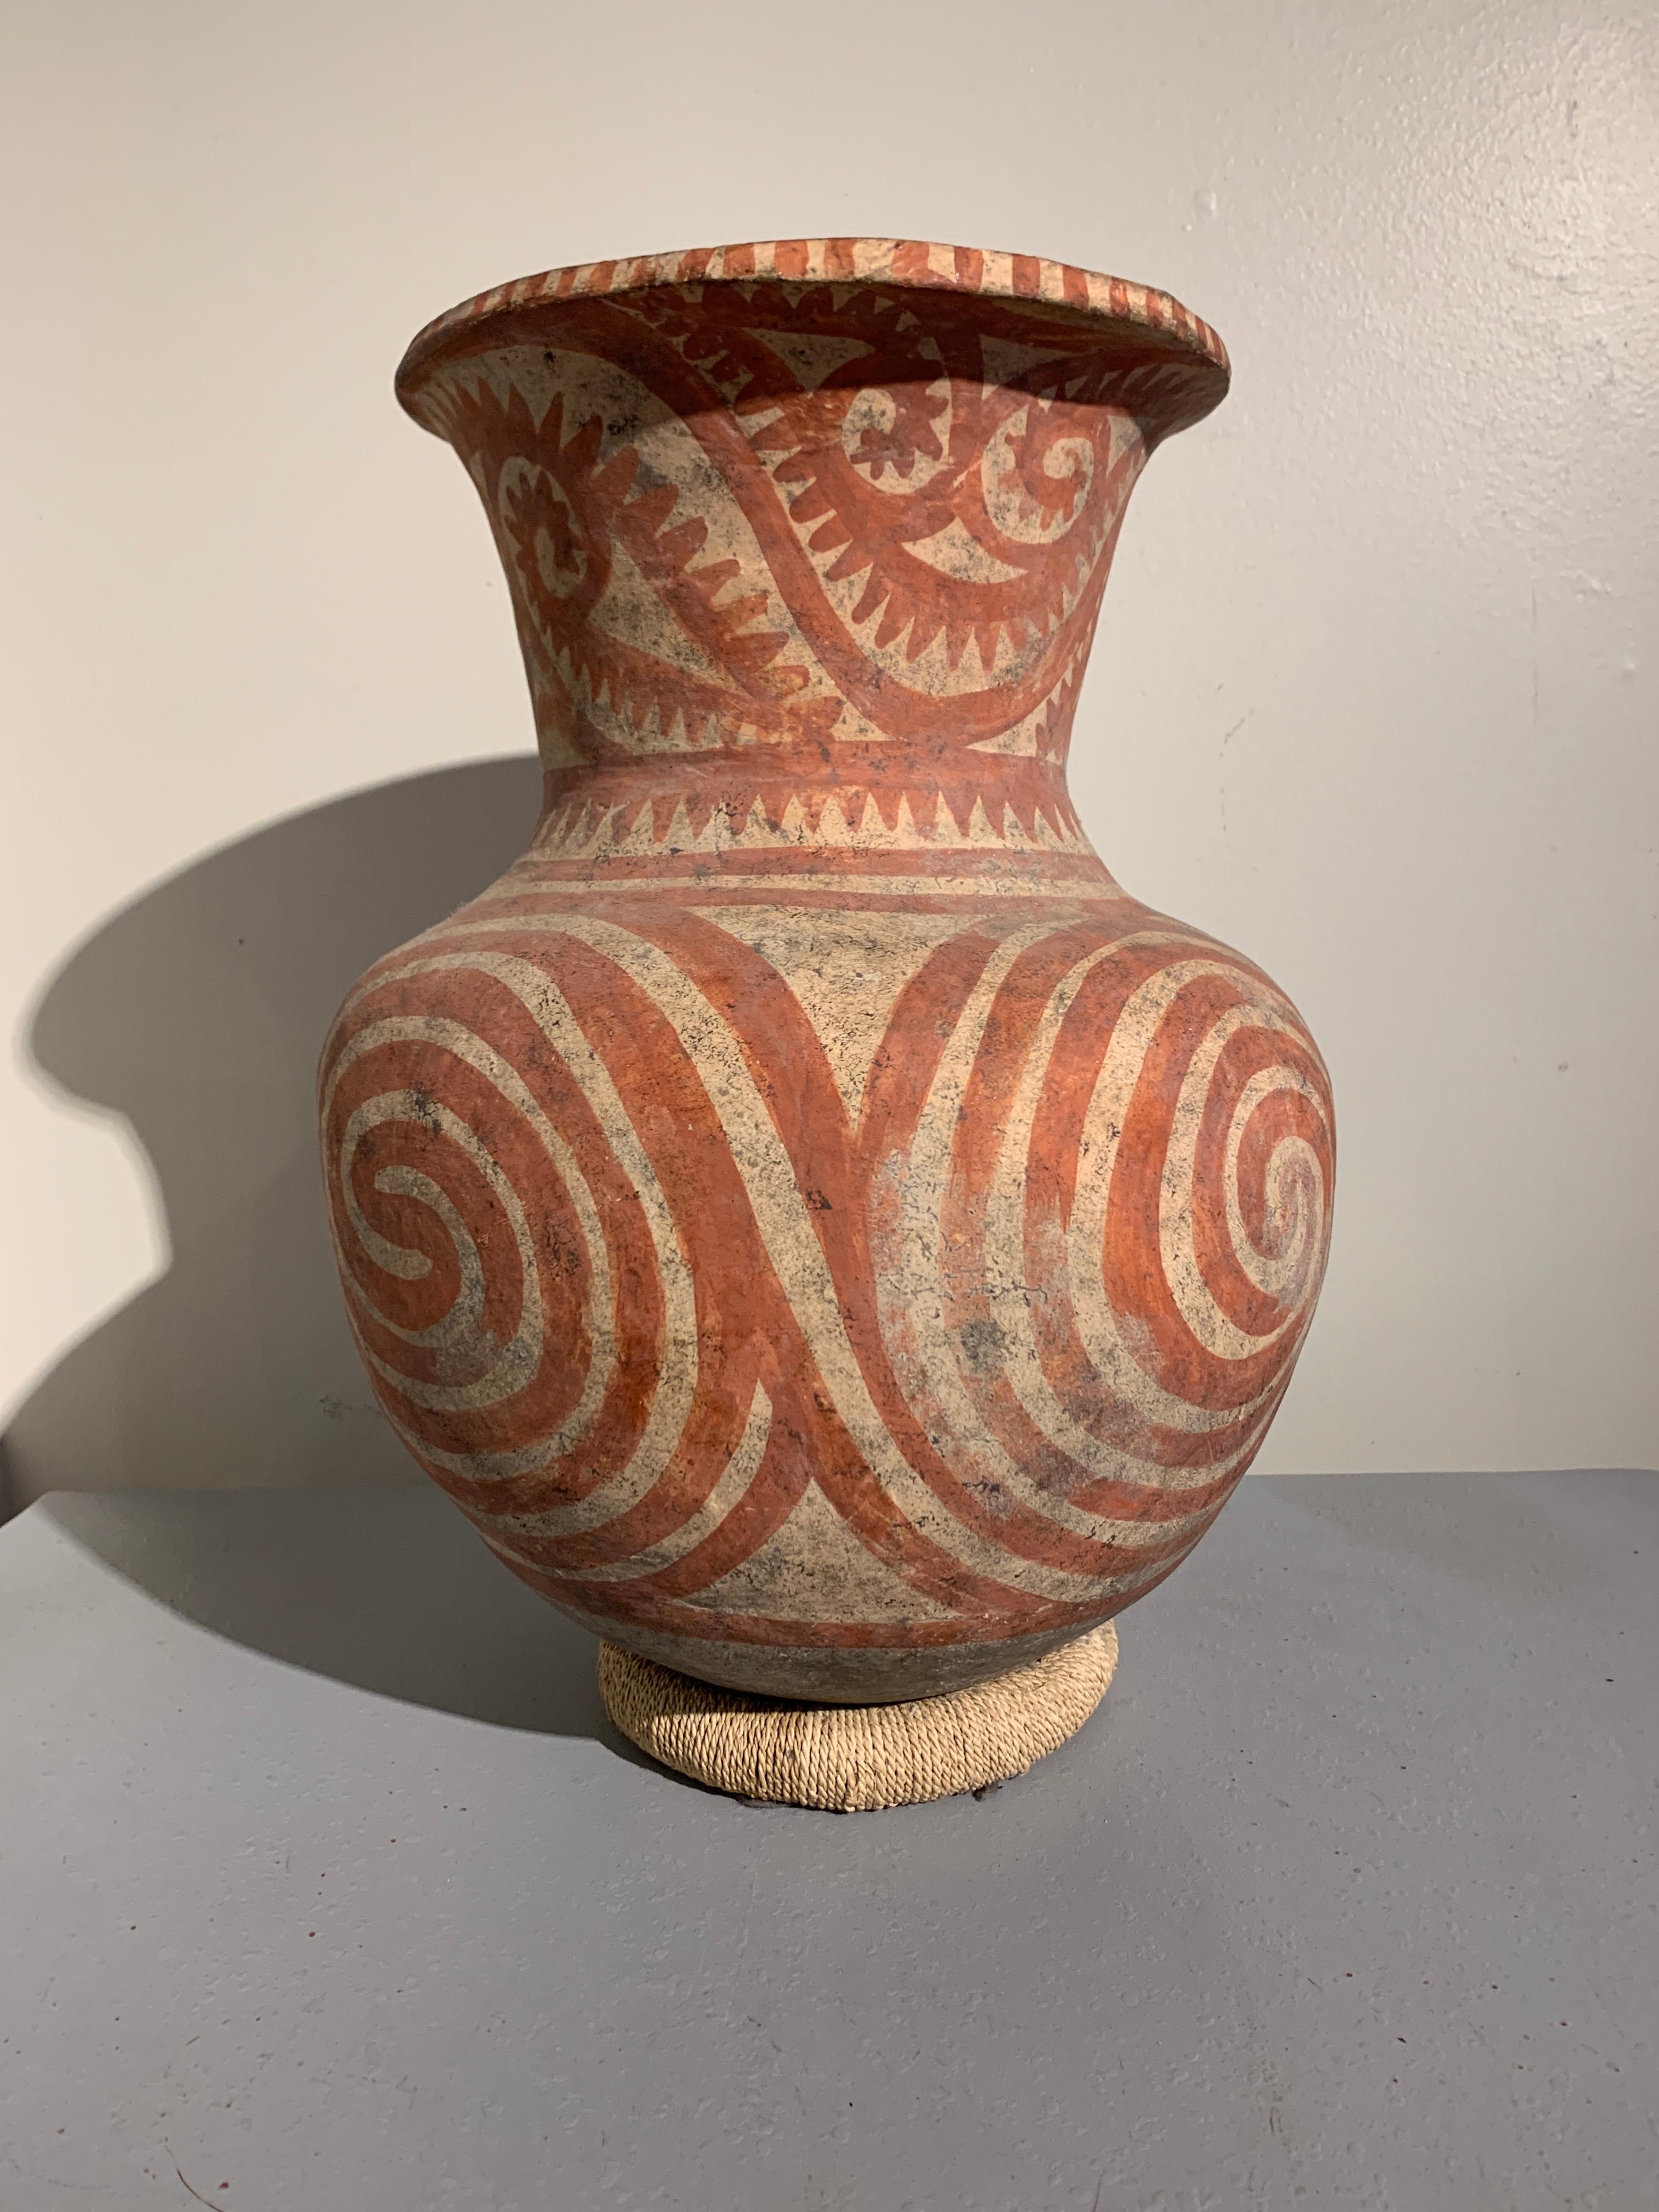 A massive Ban Chiang culture painted pottery vessel, circa 300 BC, Thailand.

The large storage jar painted with a bold spiral pattern in red ochre on a buff ground. The spiraling patterns taking up most of the body of the vessel are reminiscent